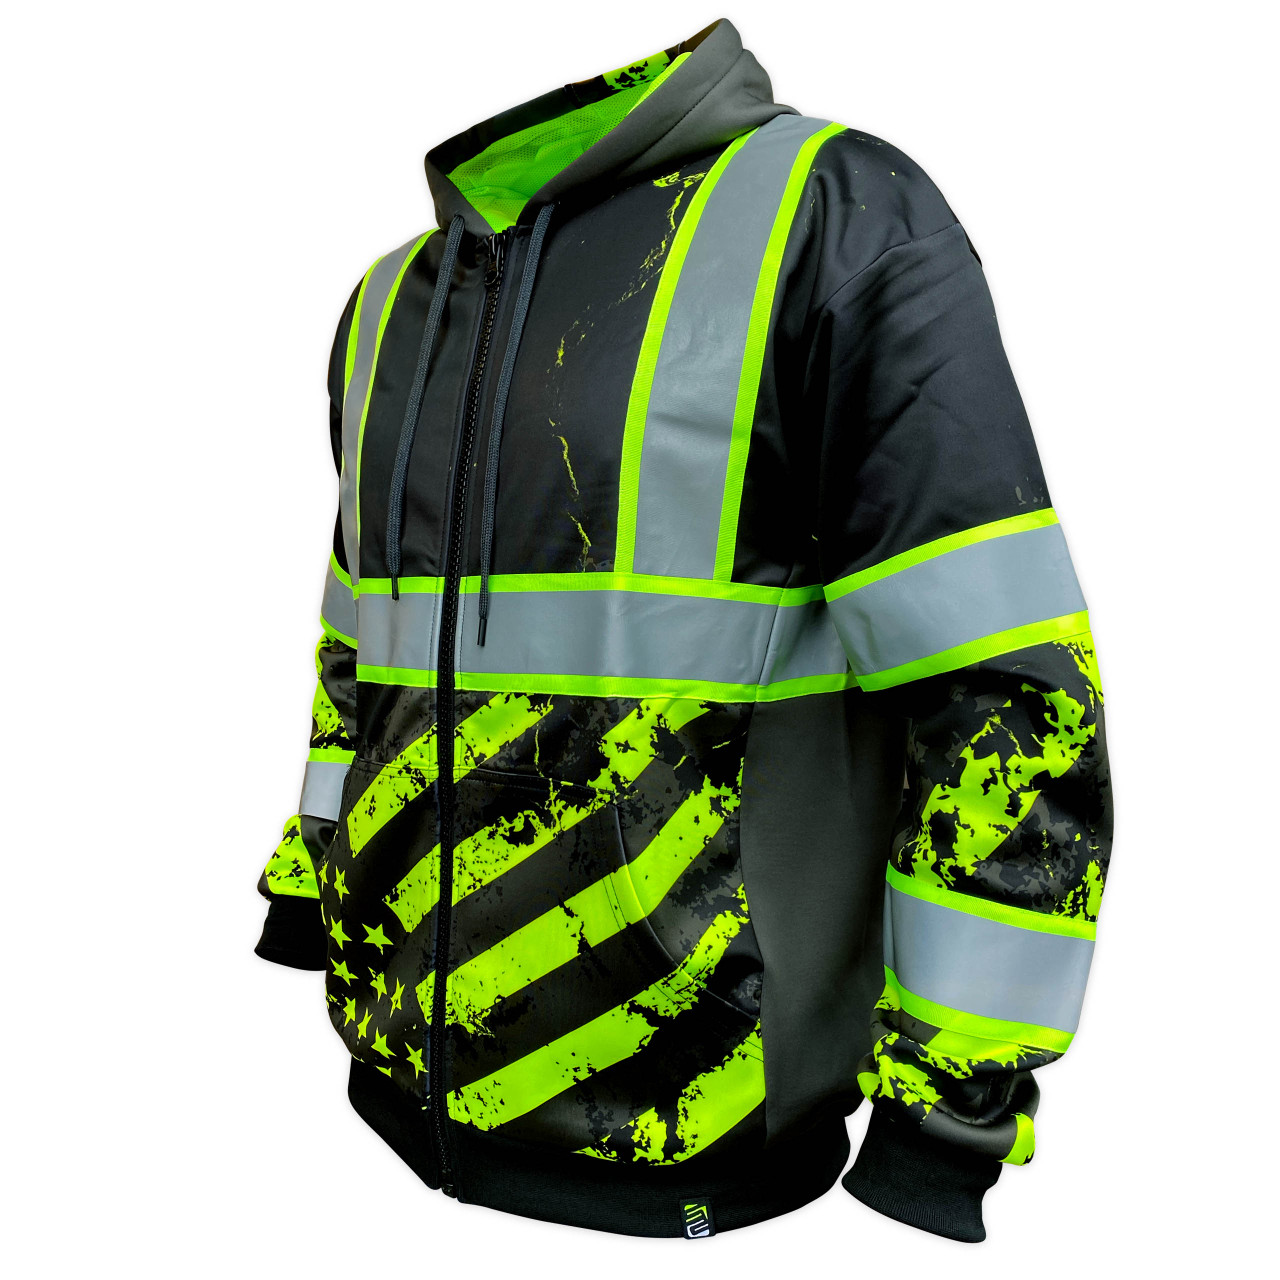 SafetyShirtz SS360o Stealth American Grit Zip-Up